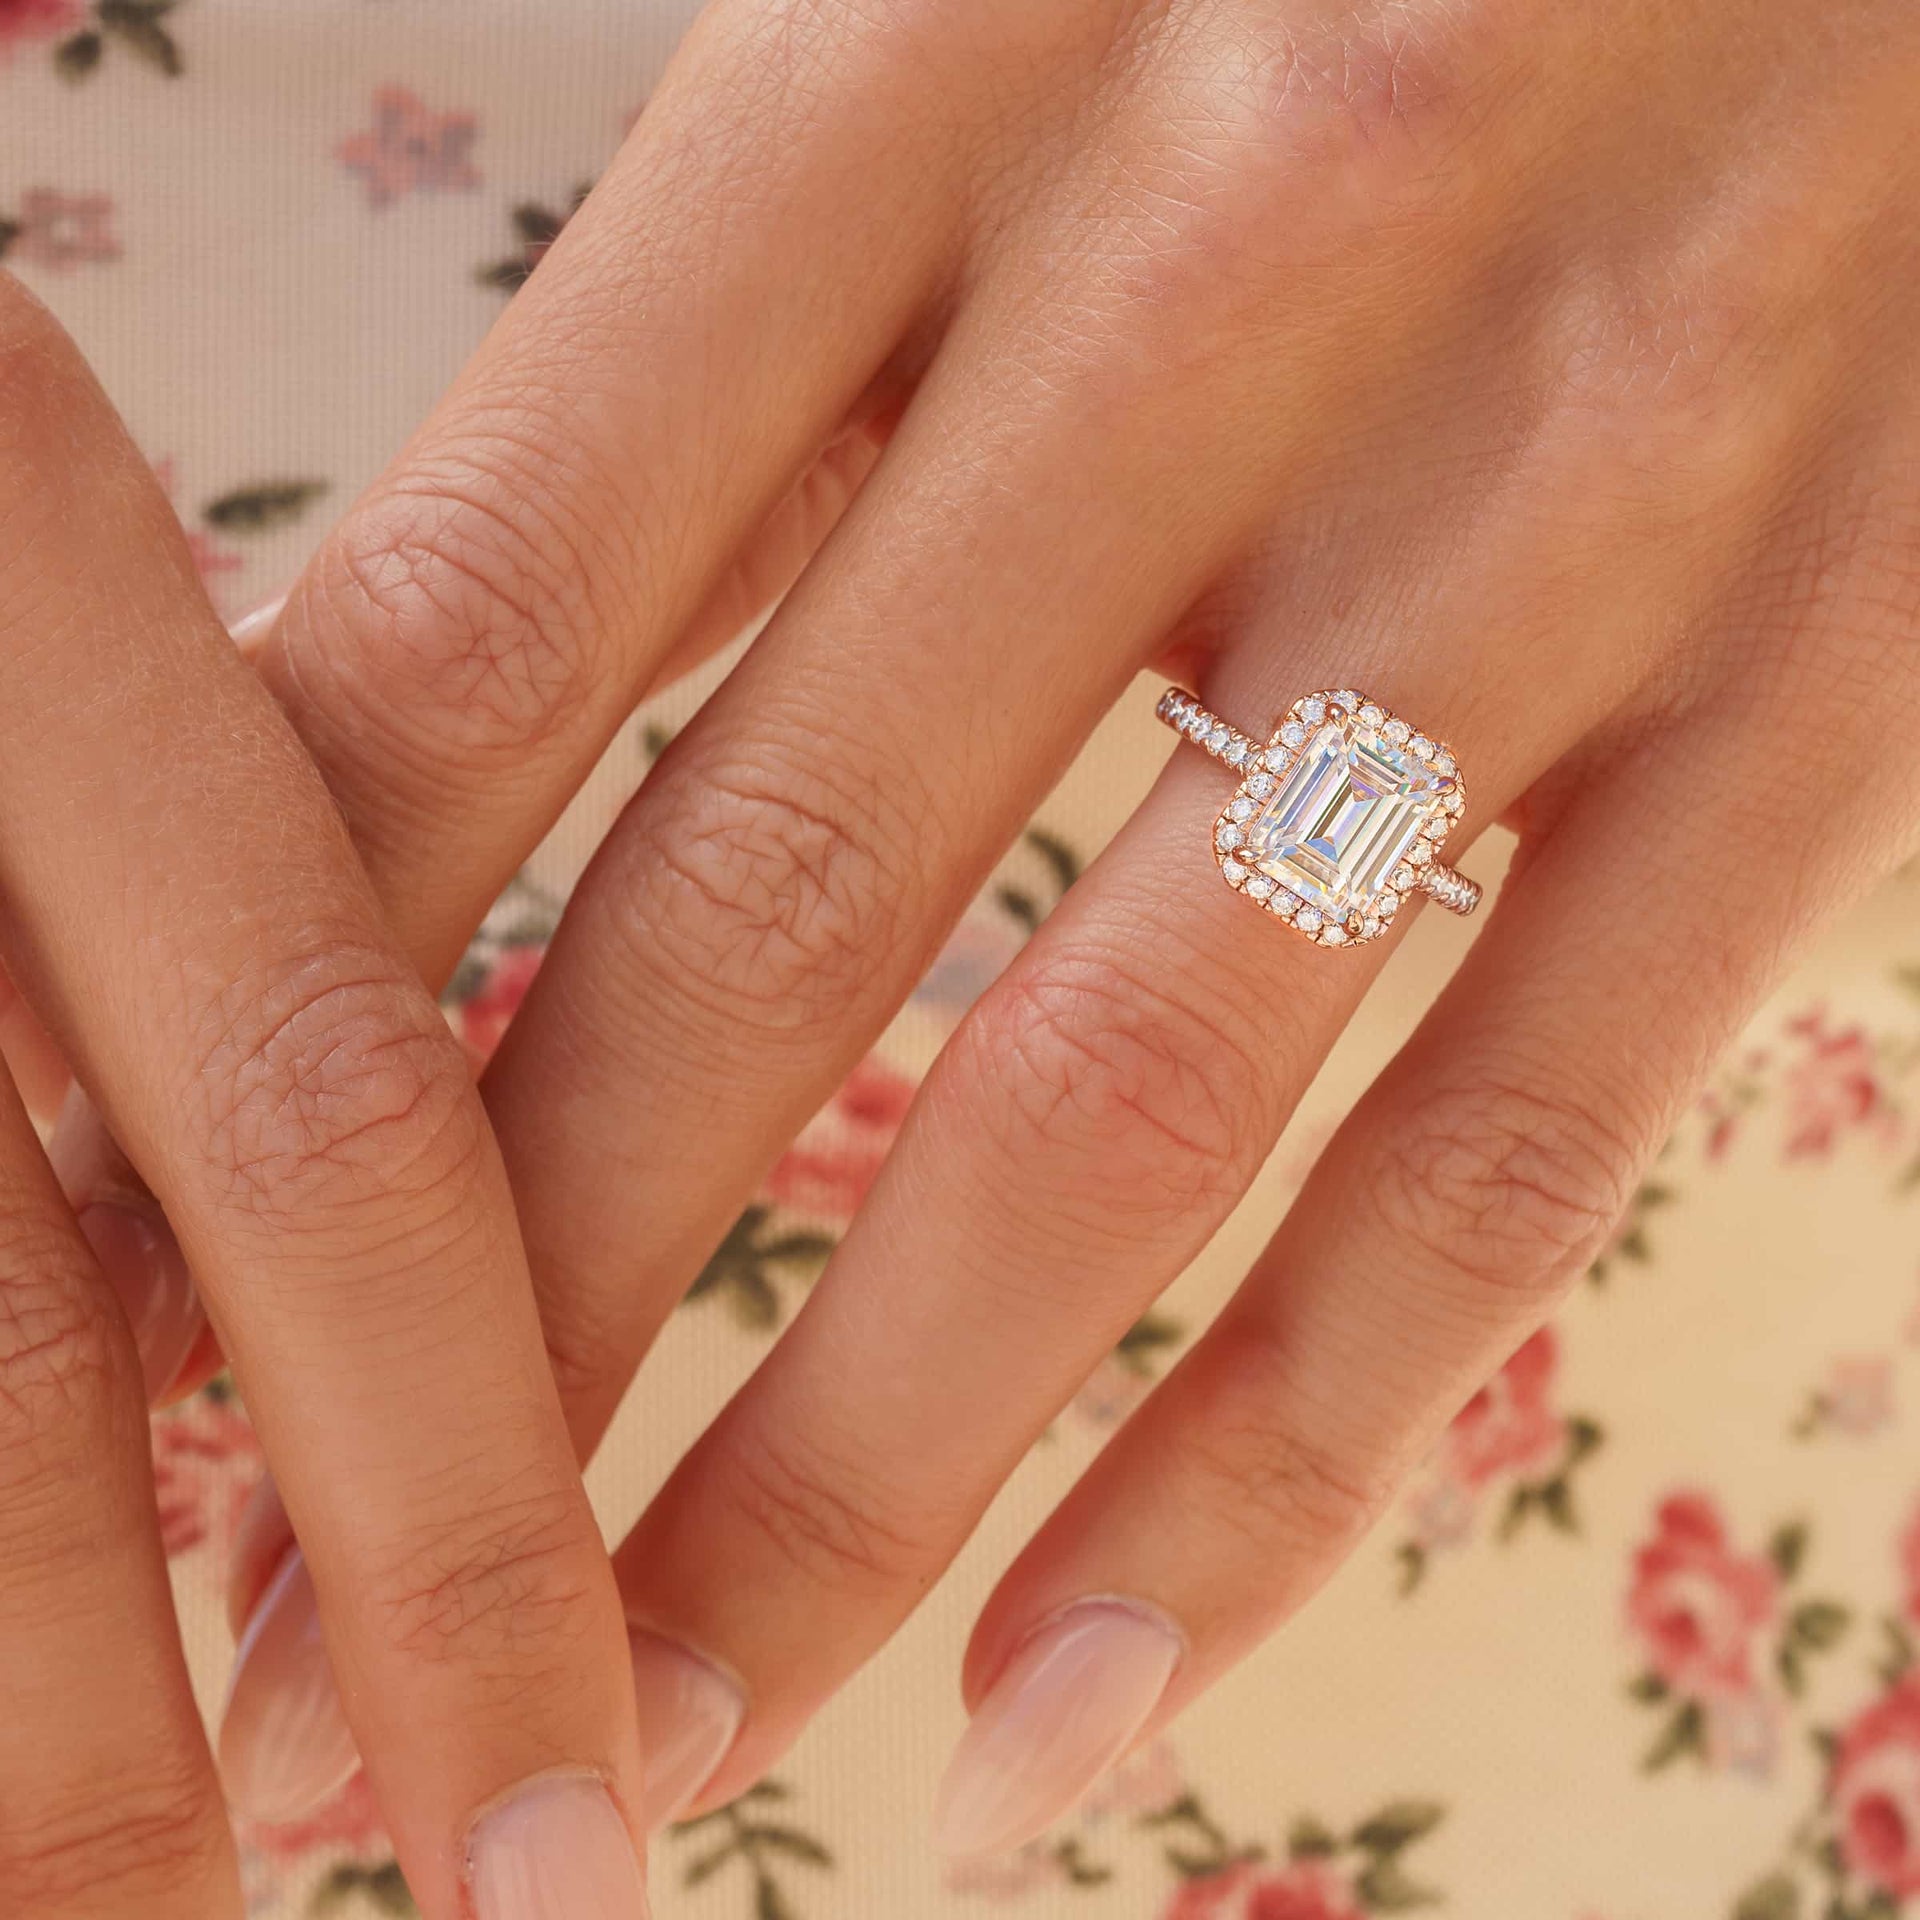 3 carat engagement ring shown in rose gold modeled on female wearing floral top 